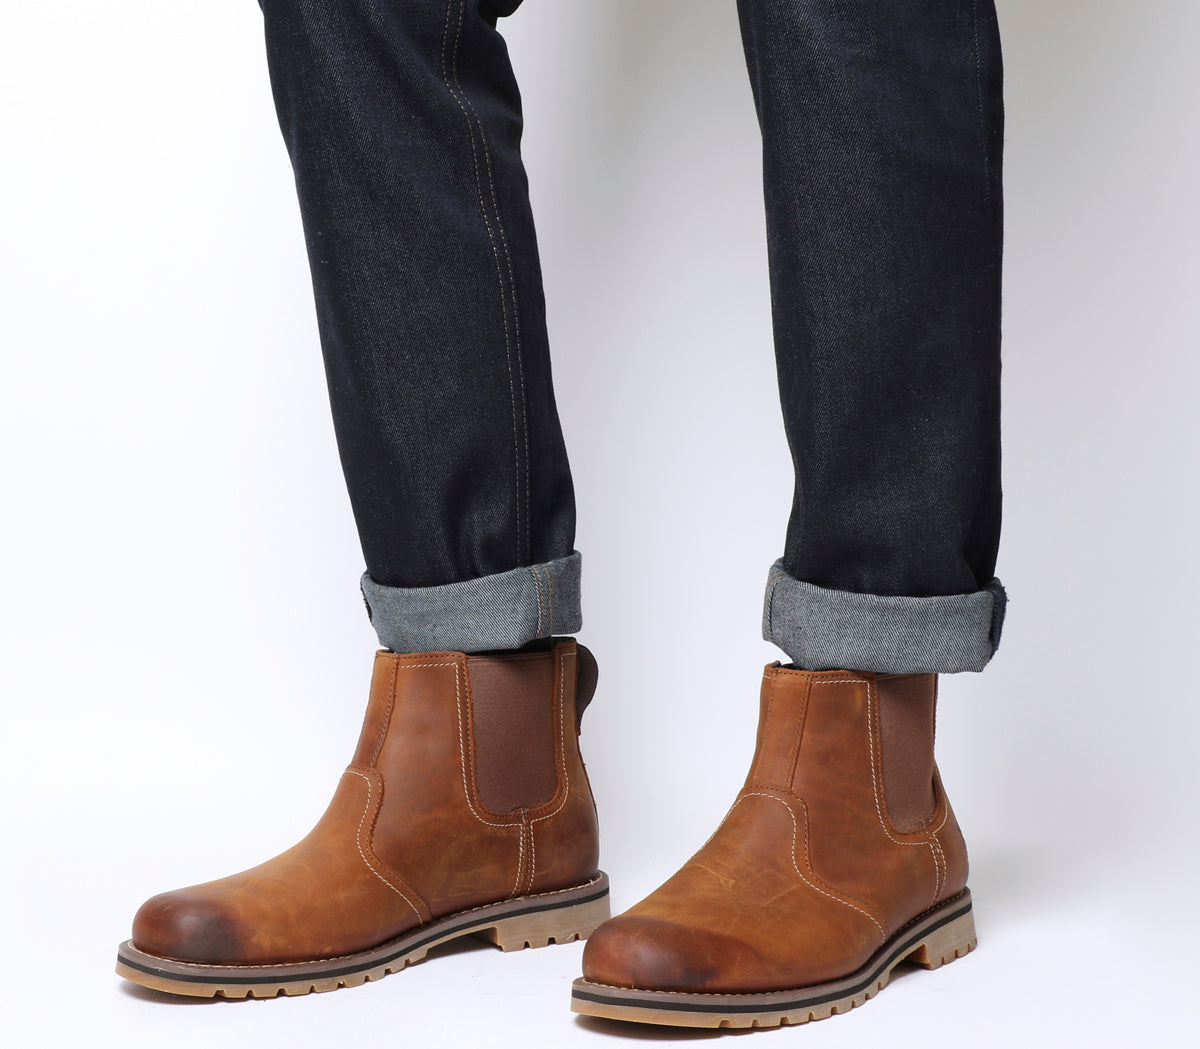 timberland larchmont chelsea boots